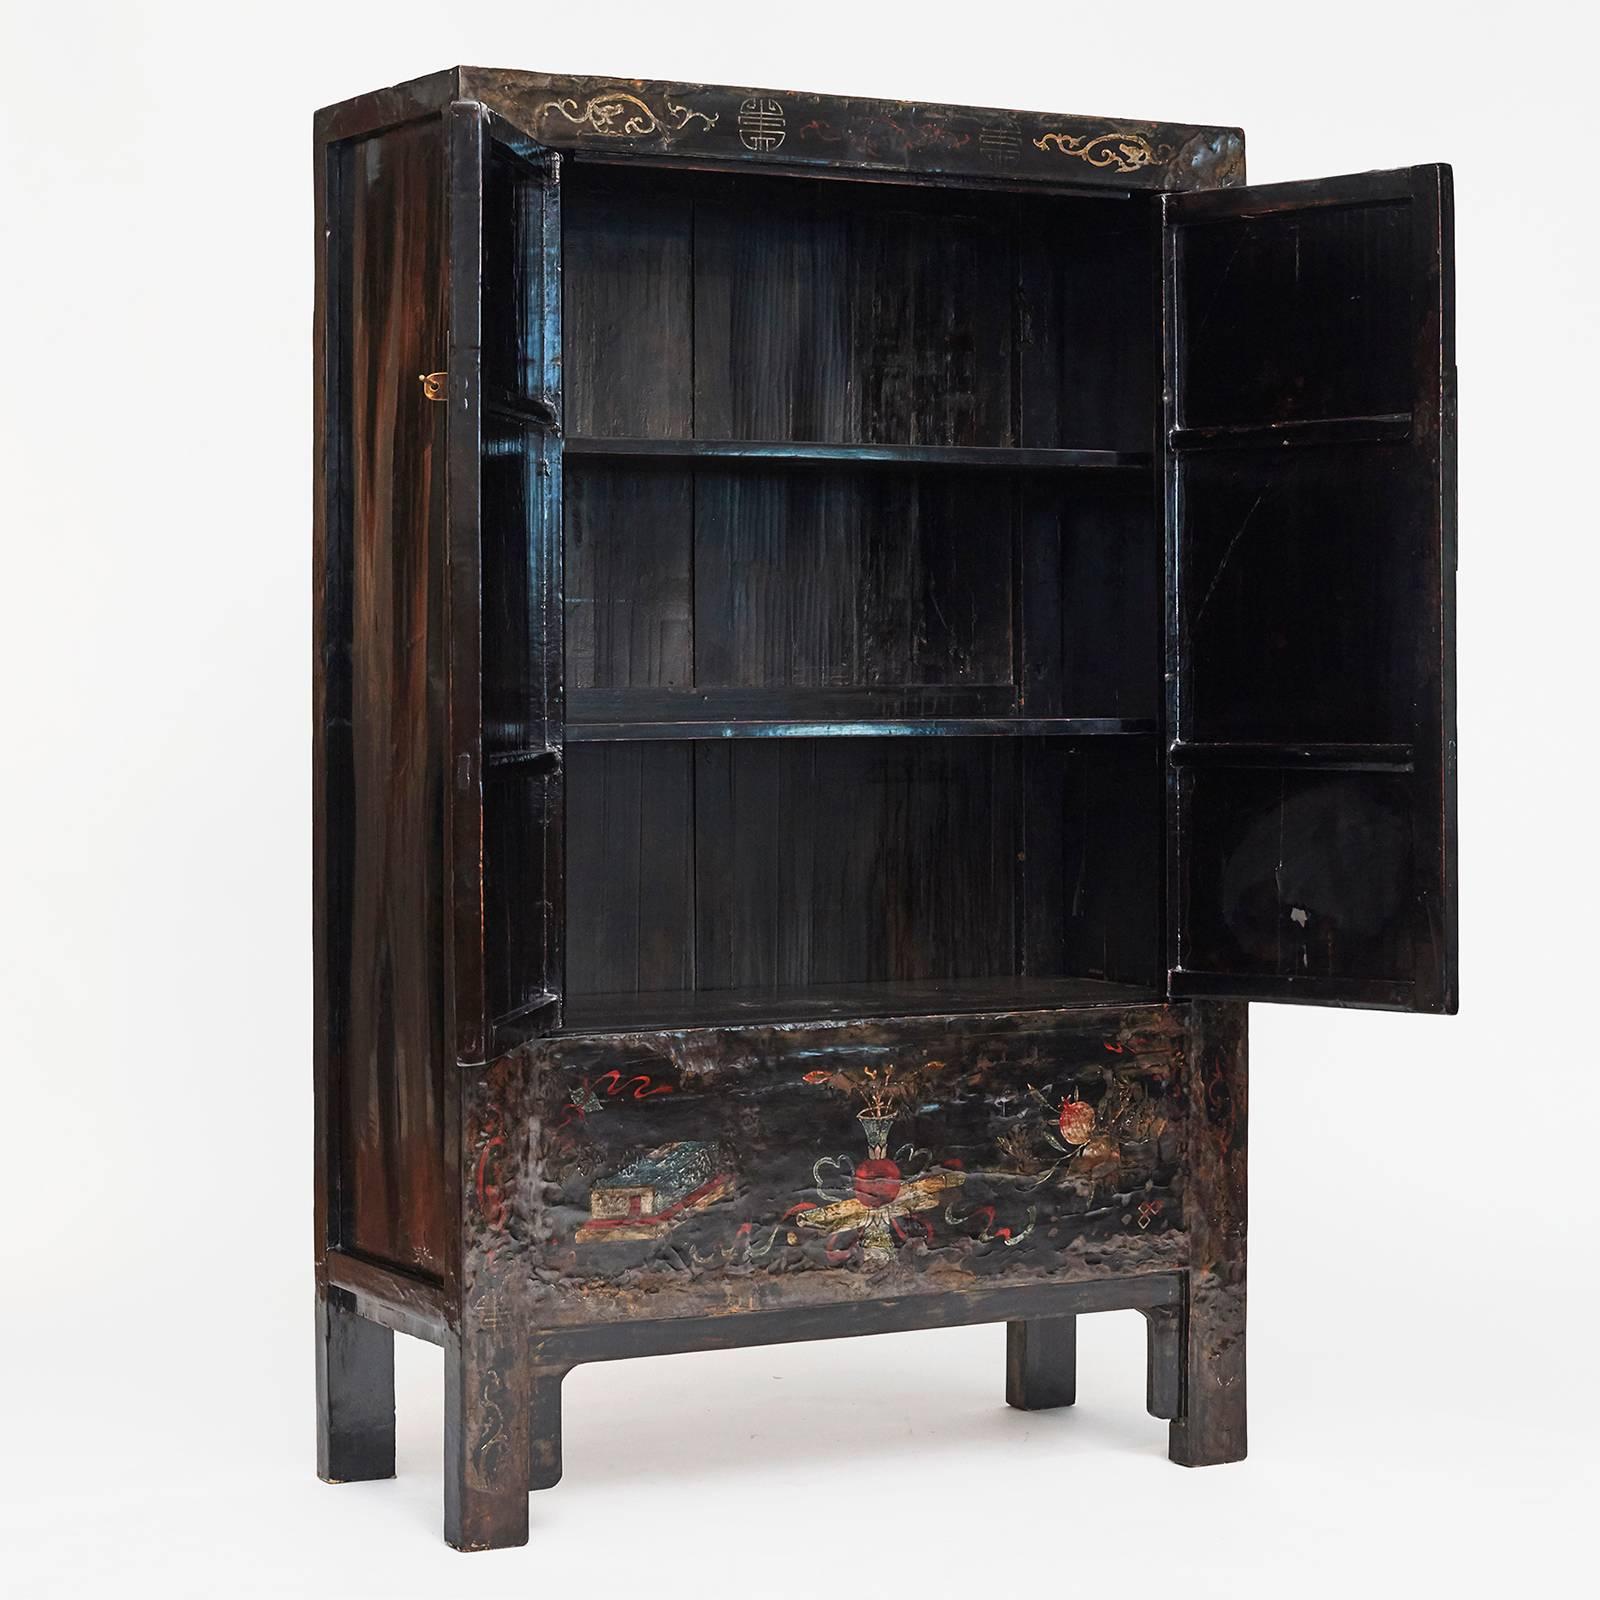 Chinese 19th Century Original Decorated lacquer cabinet from 